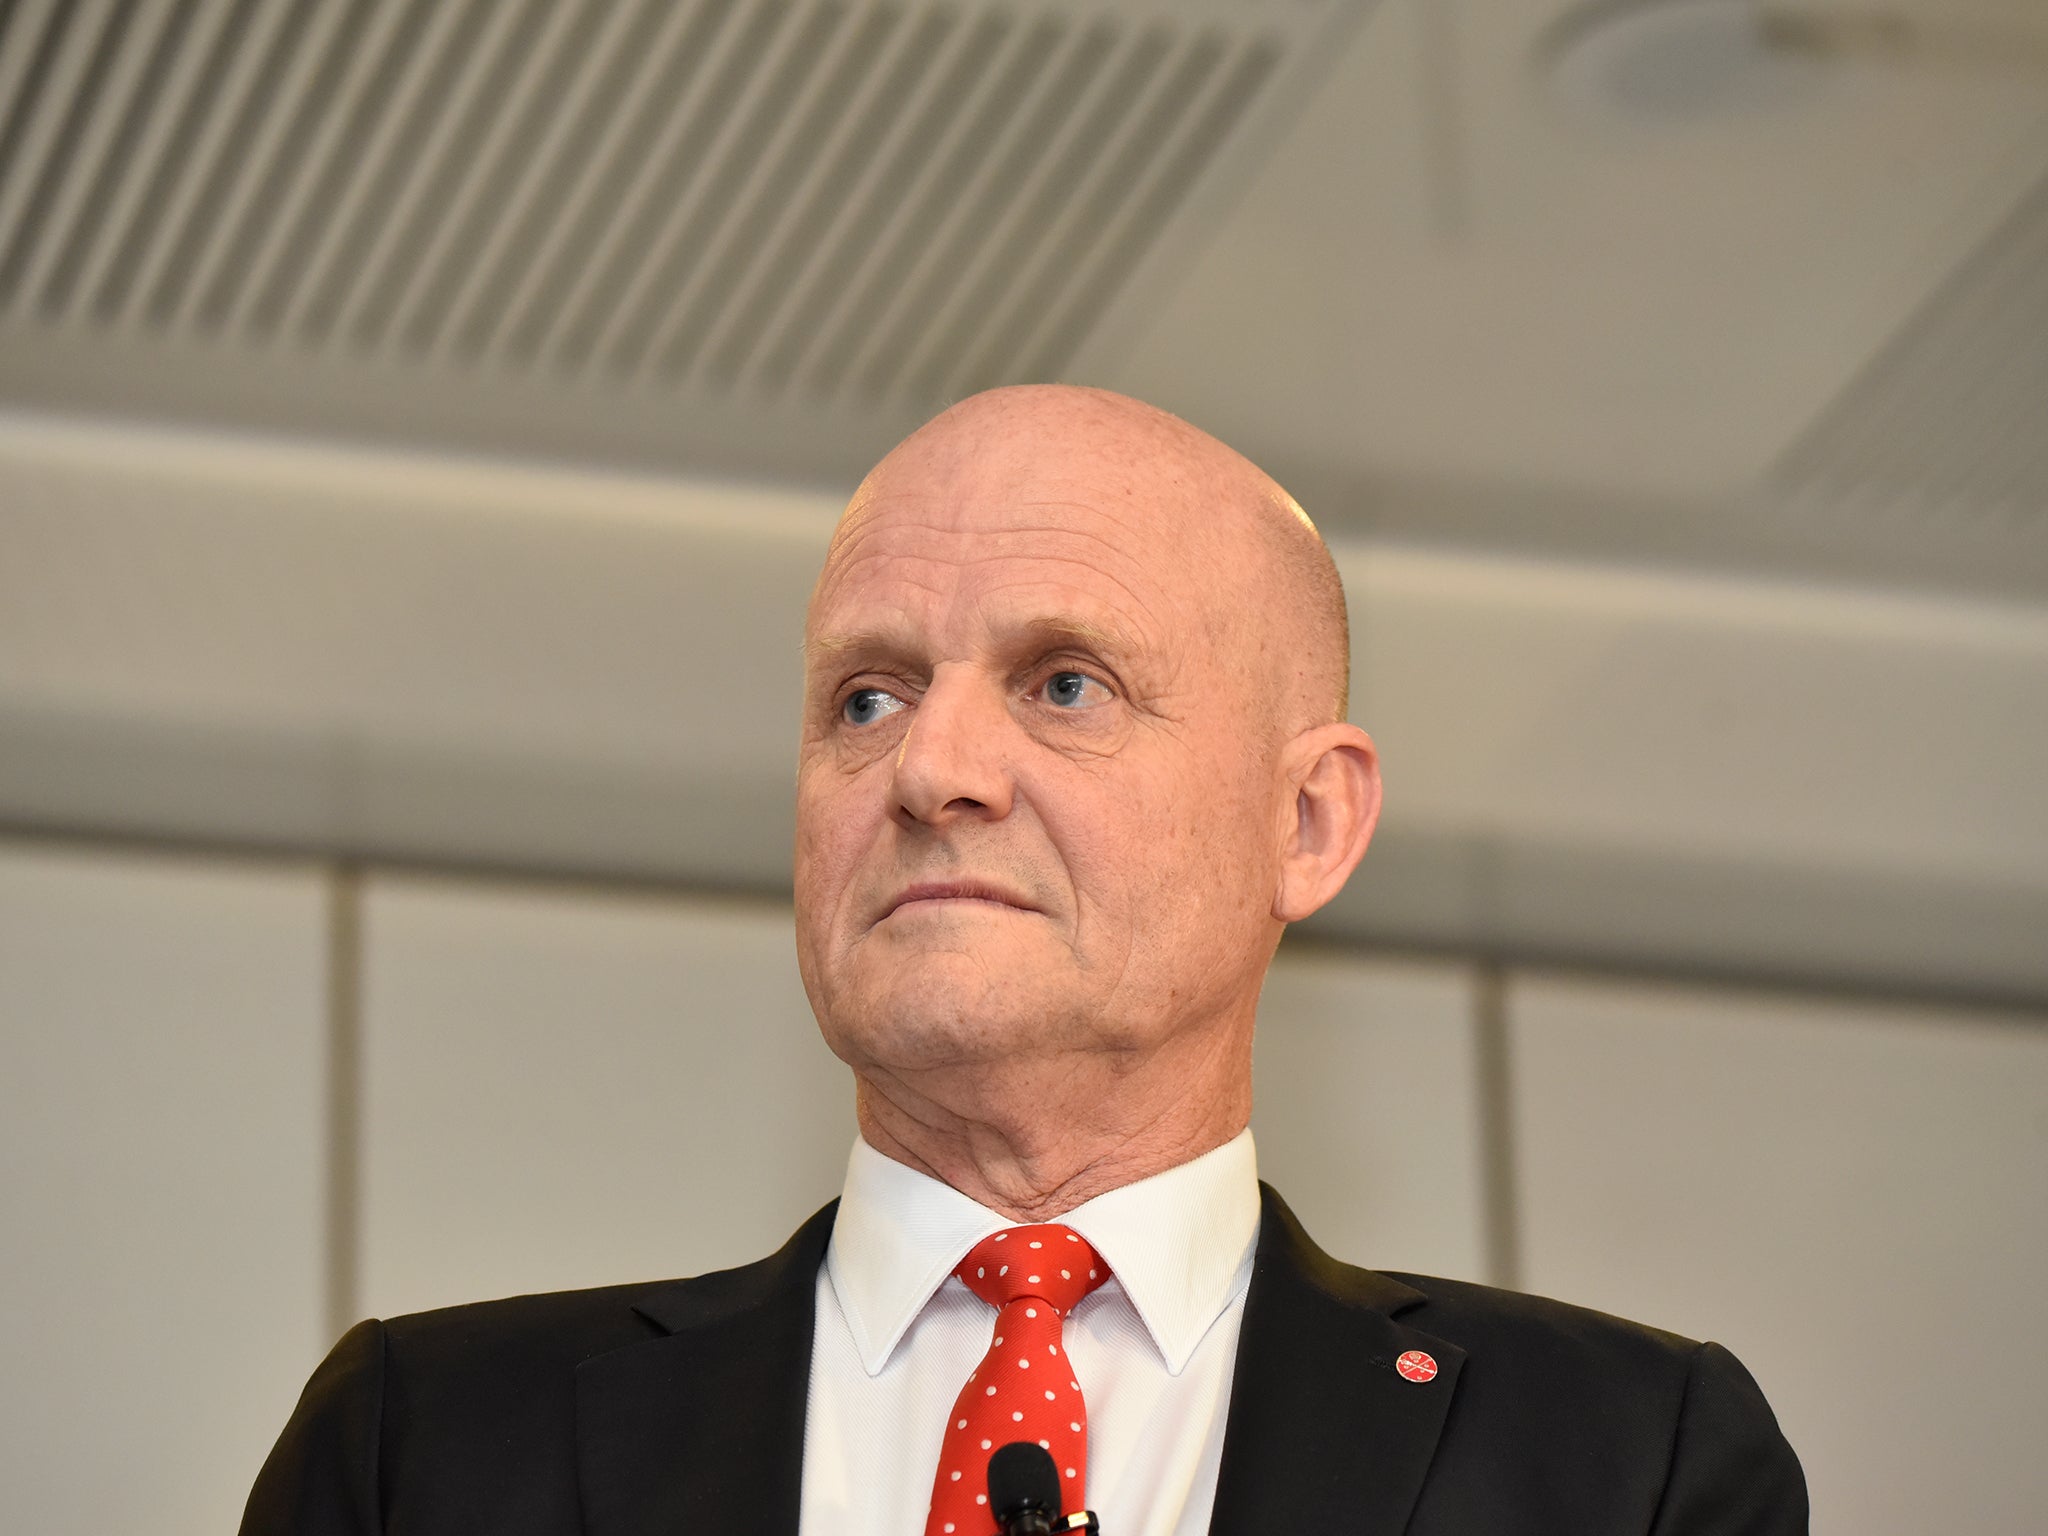 David Leyonhjelm, Liberal Democrats senator, said migrants were 'changing the complexion of Australia for the better'